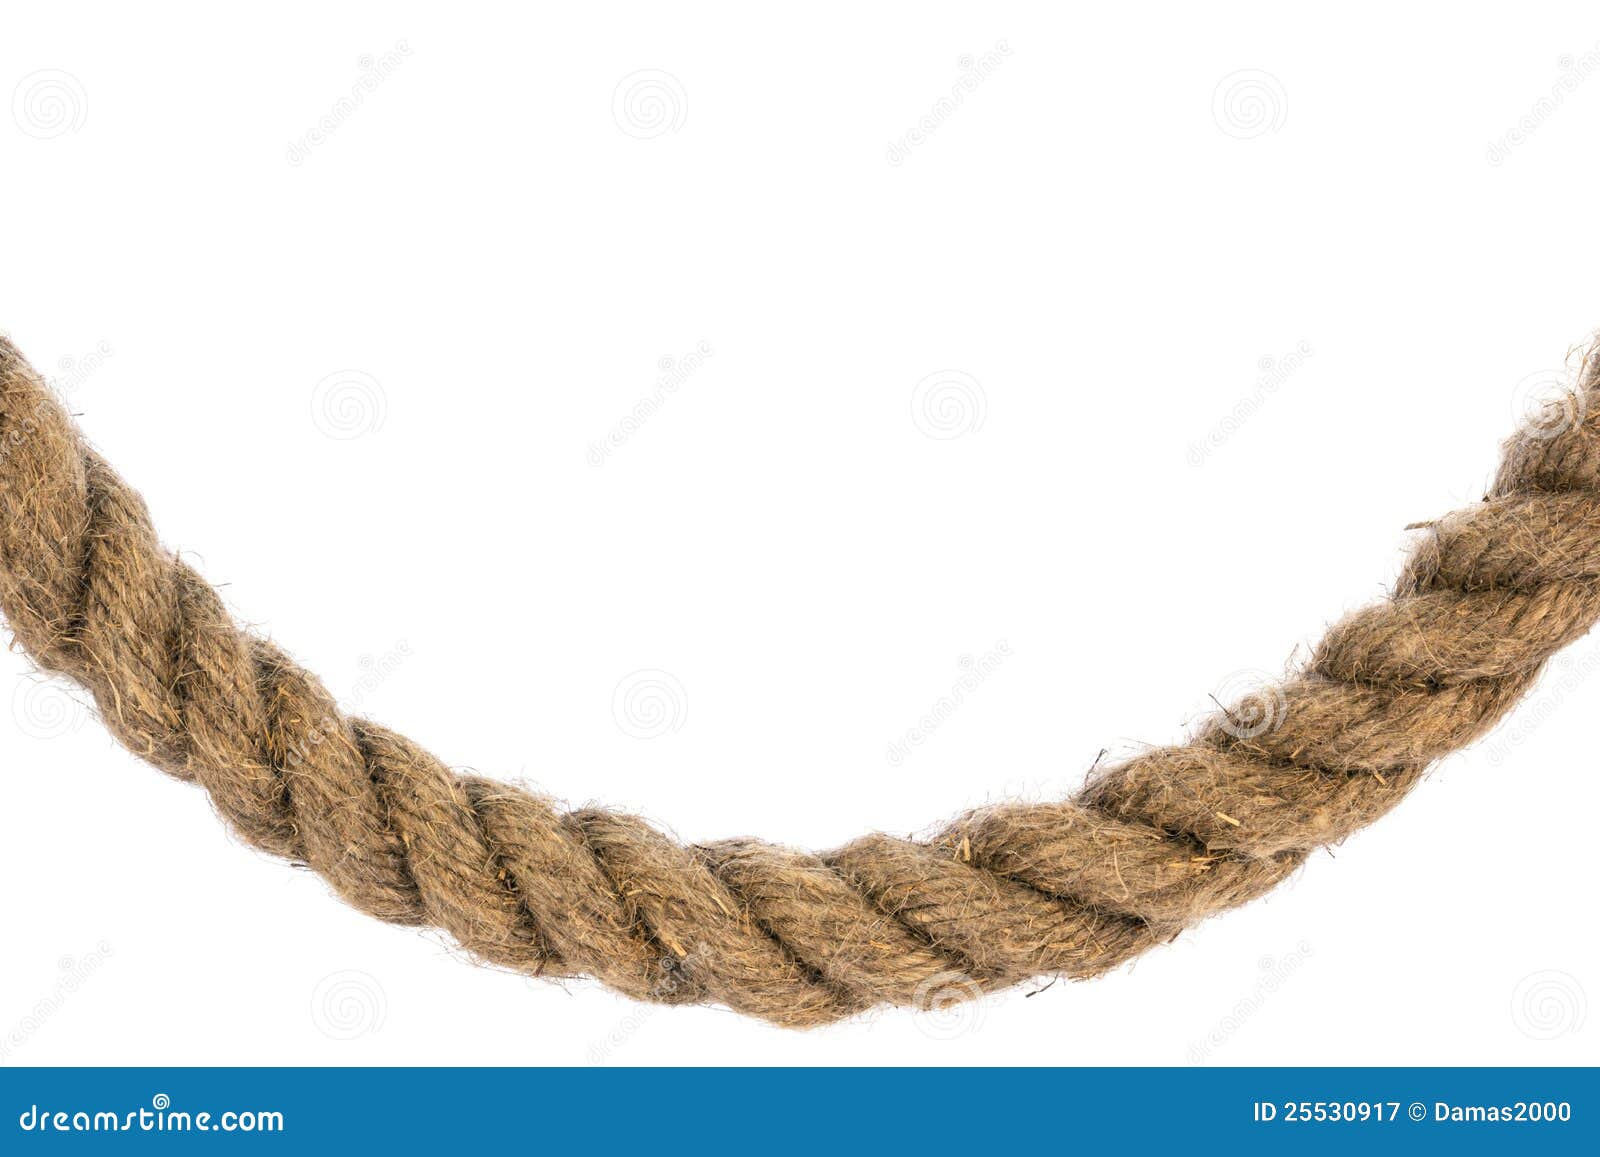 Roll of a thin rope with a loop for hanging, isolated on white background  Stock Photo